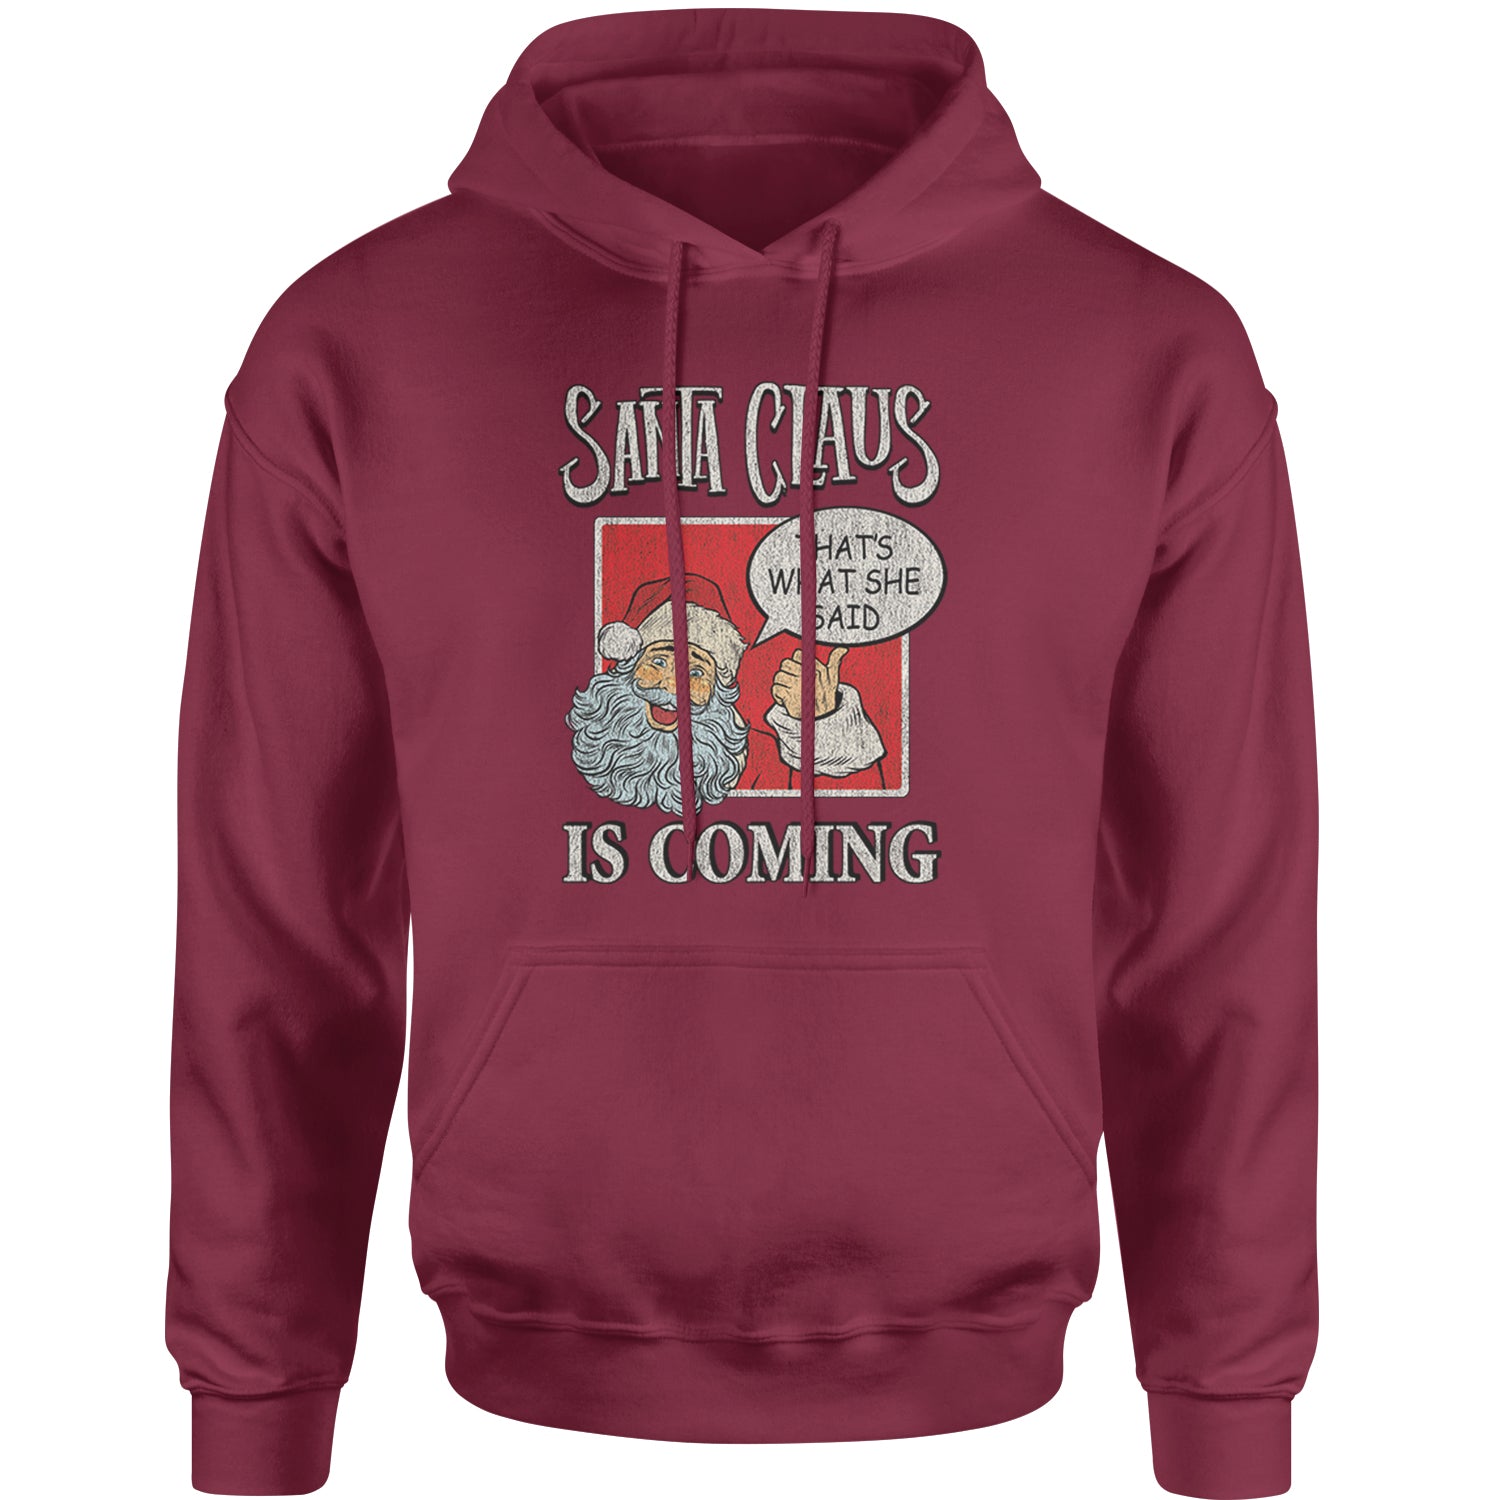 Santa Claus Is Coming - That's What She Said Adult Hoodie Sweatshirt christmas, dunder, holiday, michael, mifflin, office, sweater, ugly, xmas by Expression Tees